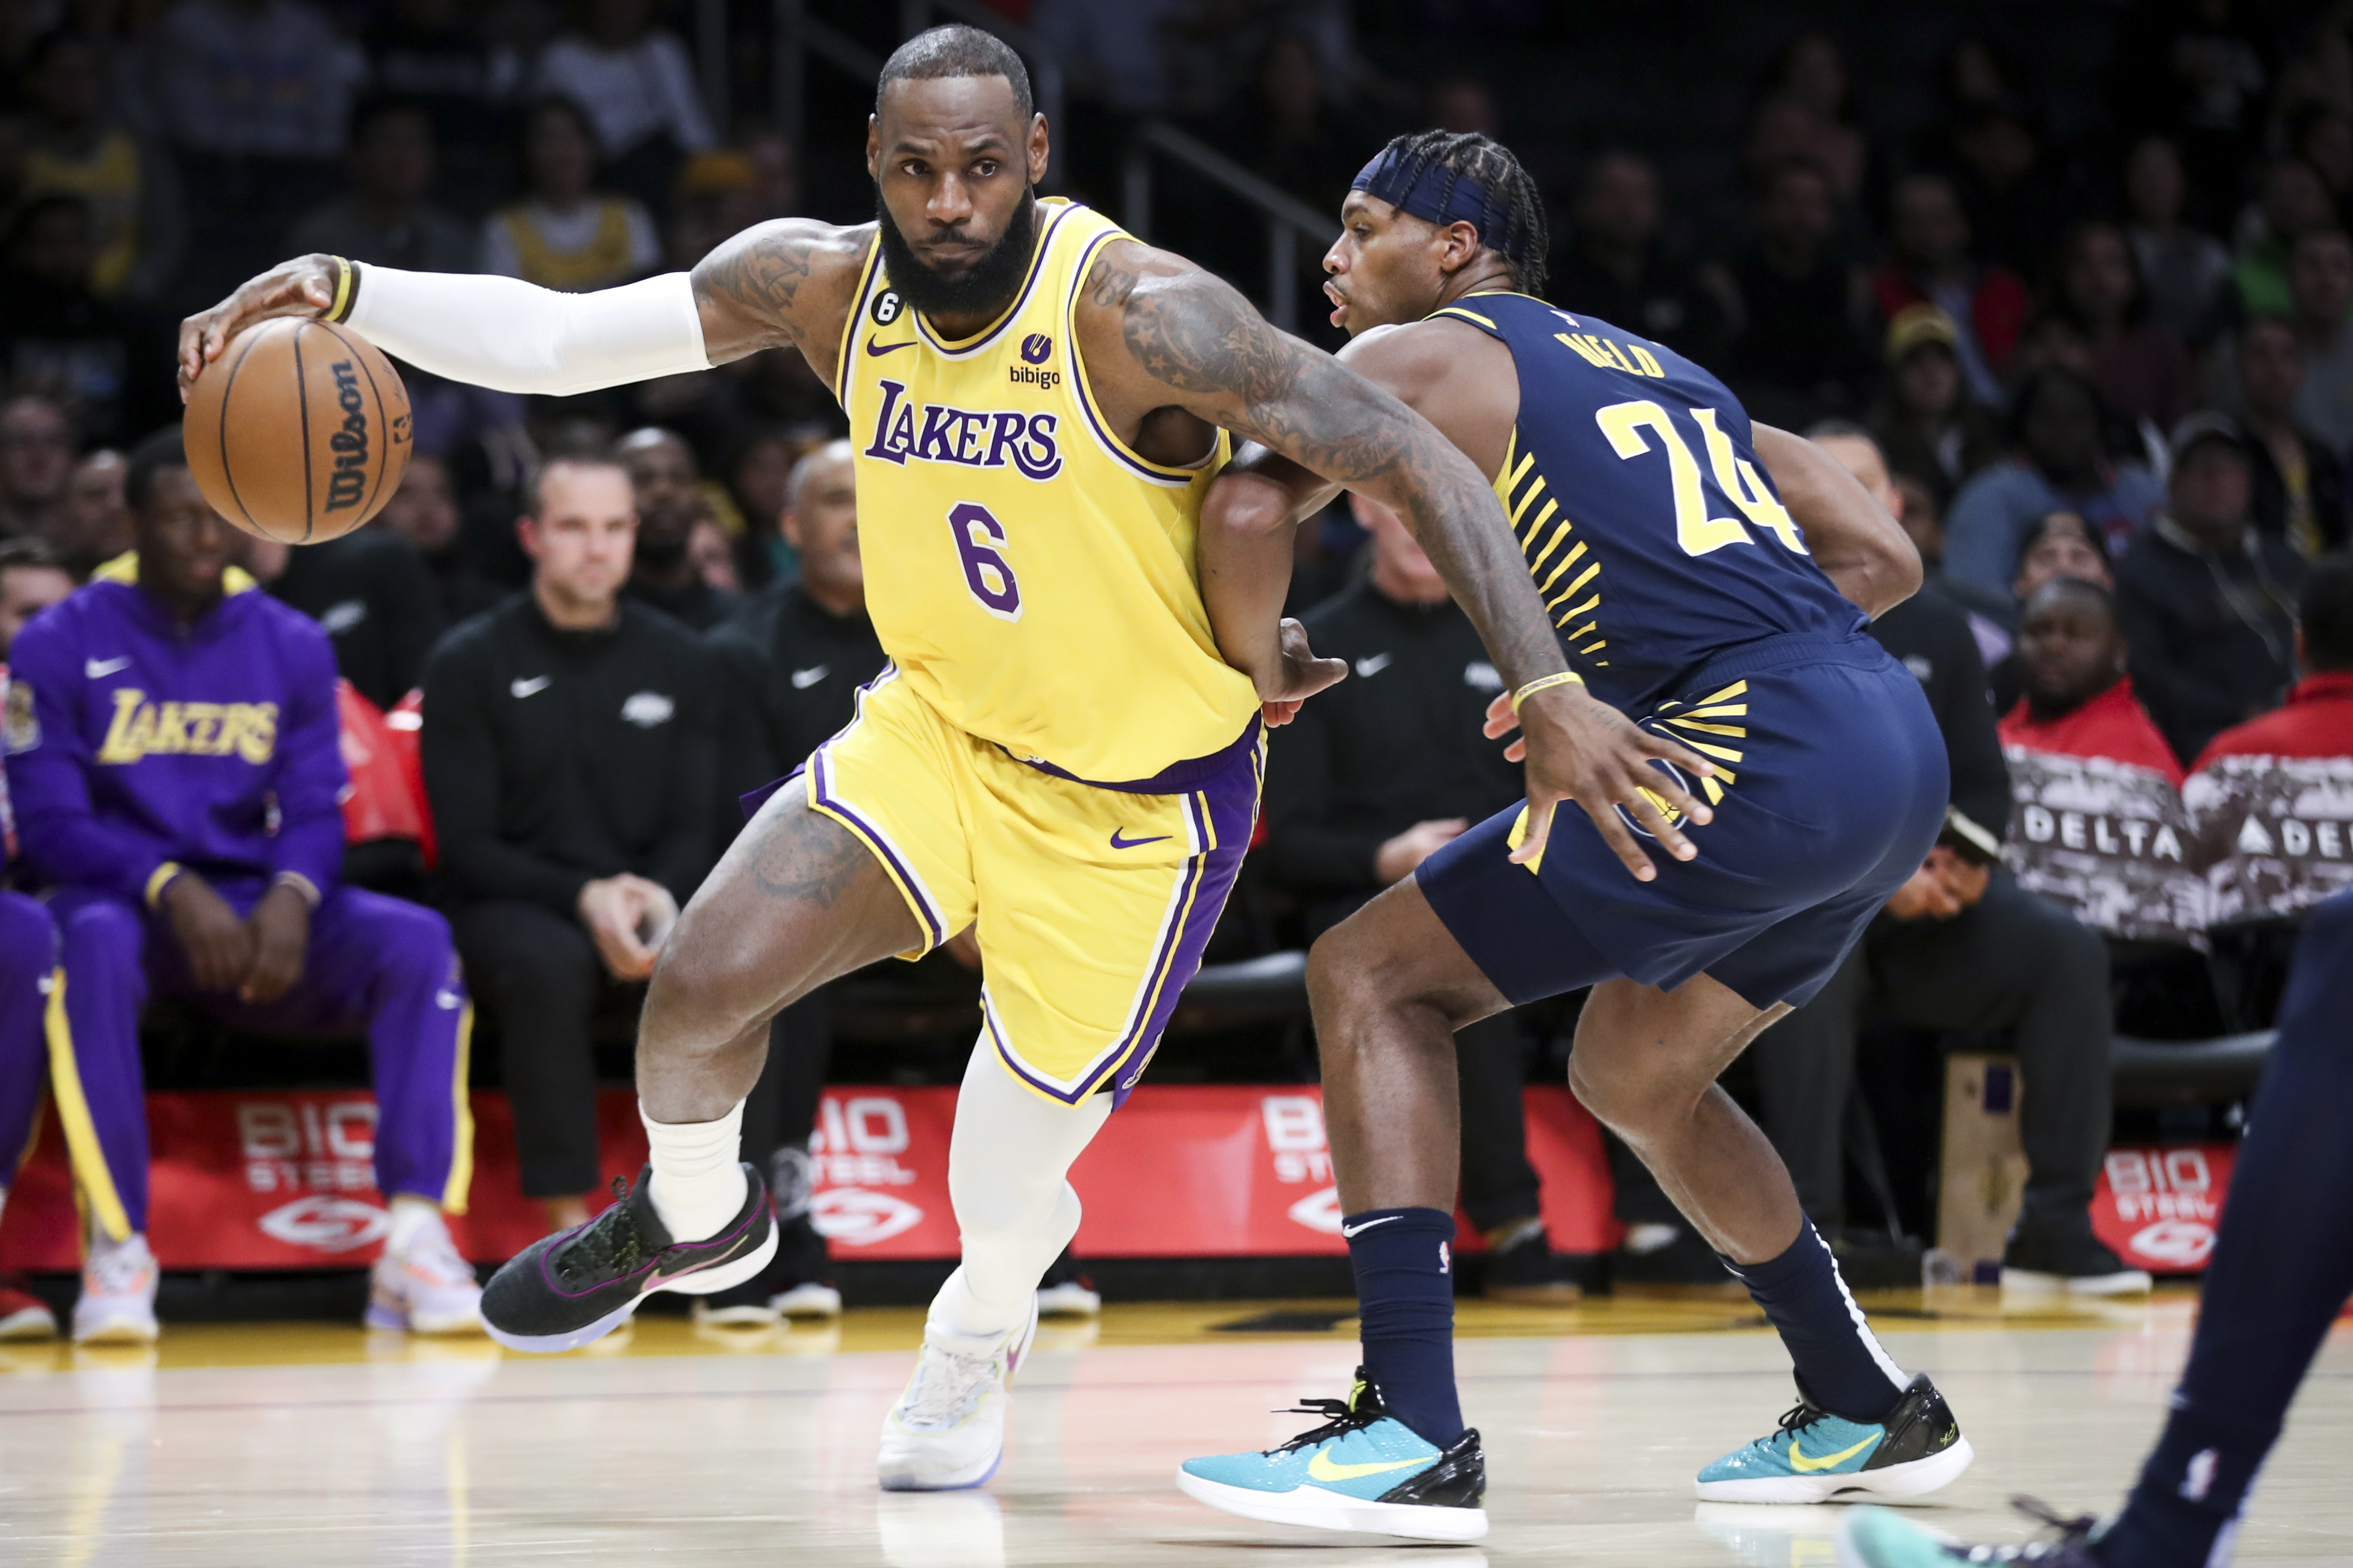 lakers blow 17-point lead late as they fall to pacers at the buzzer